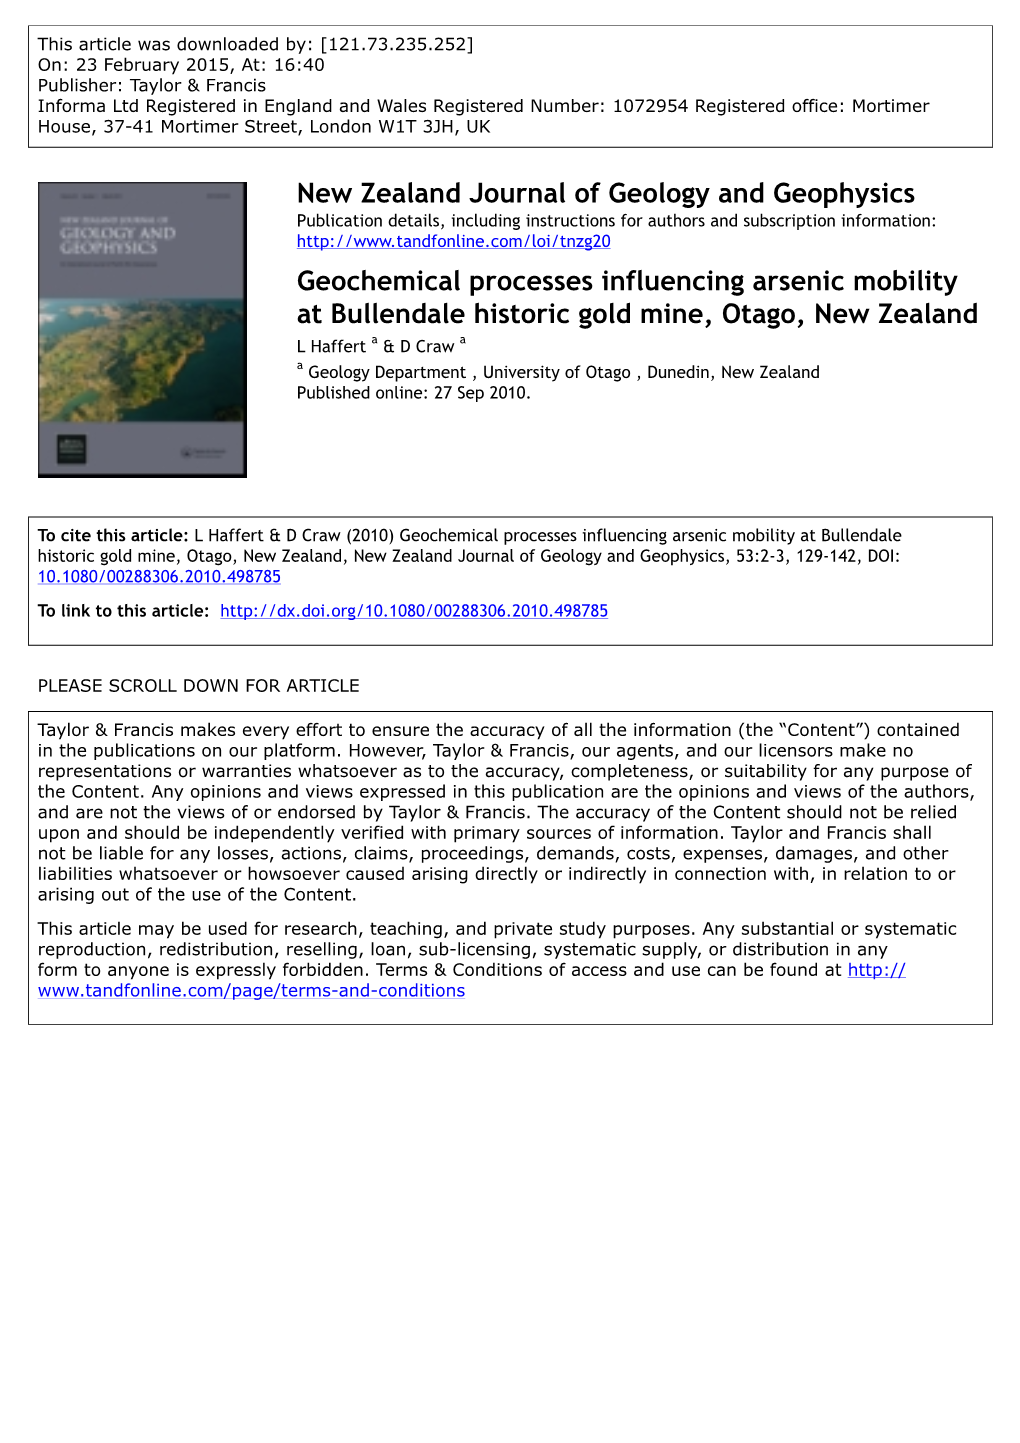 New Zealand Journal of Geology and Geophysics Geochemical Processes Influencing Arsenic Mobility at Bullendale Historic Gold